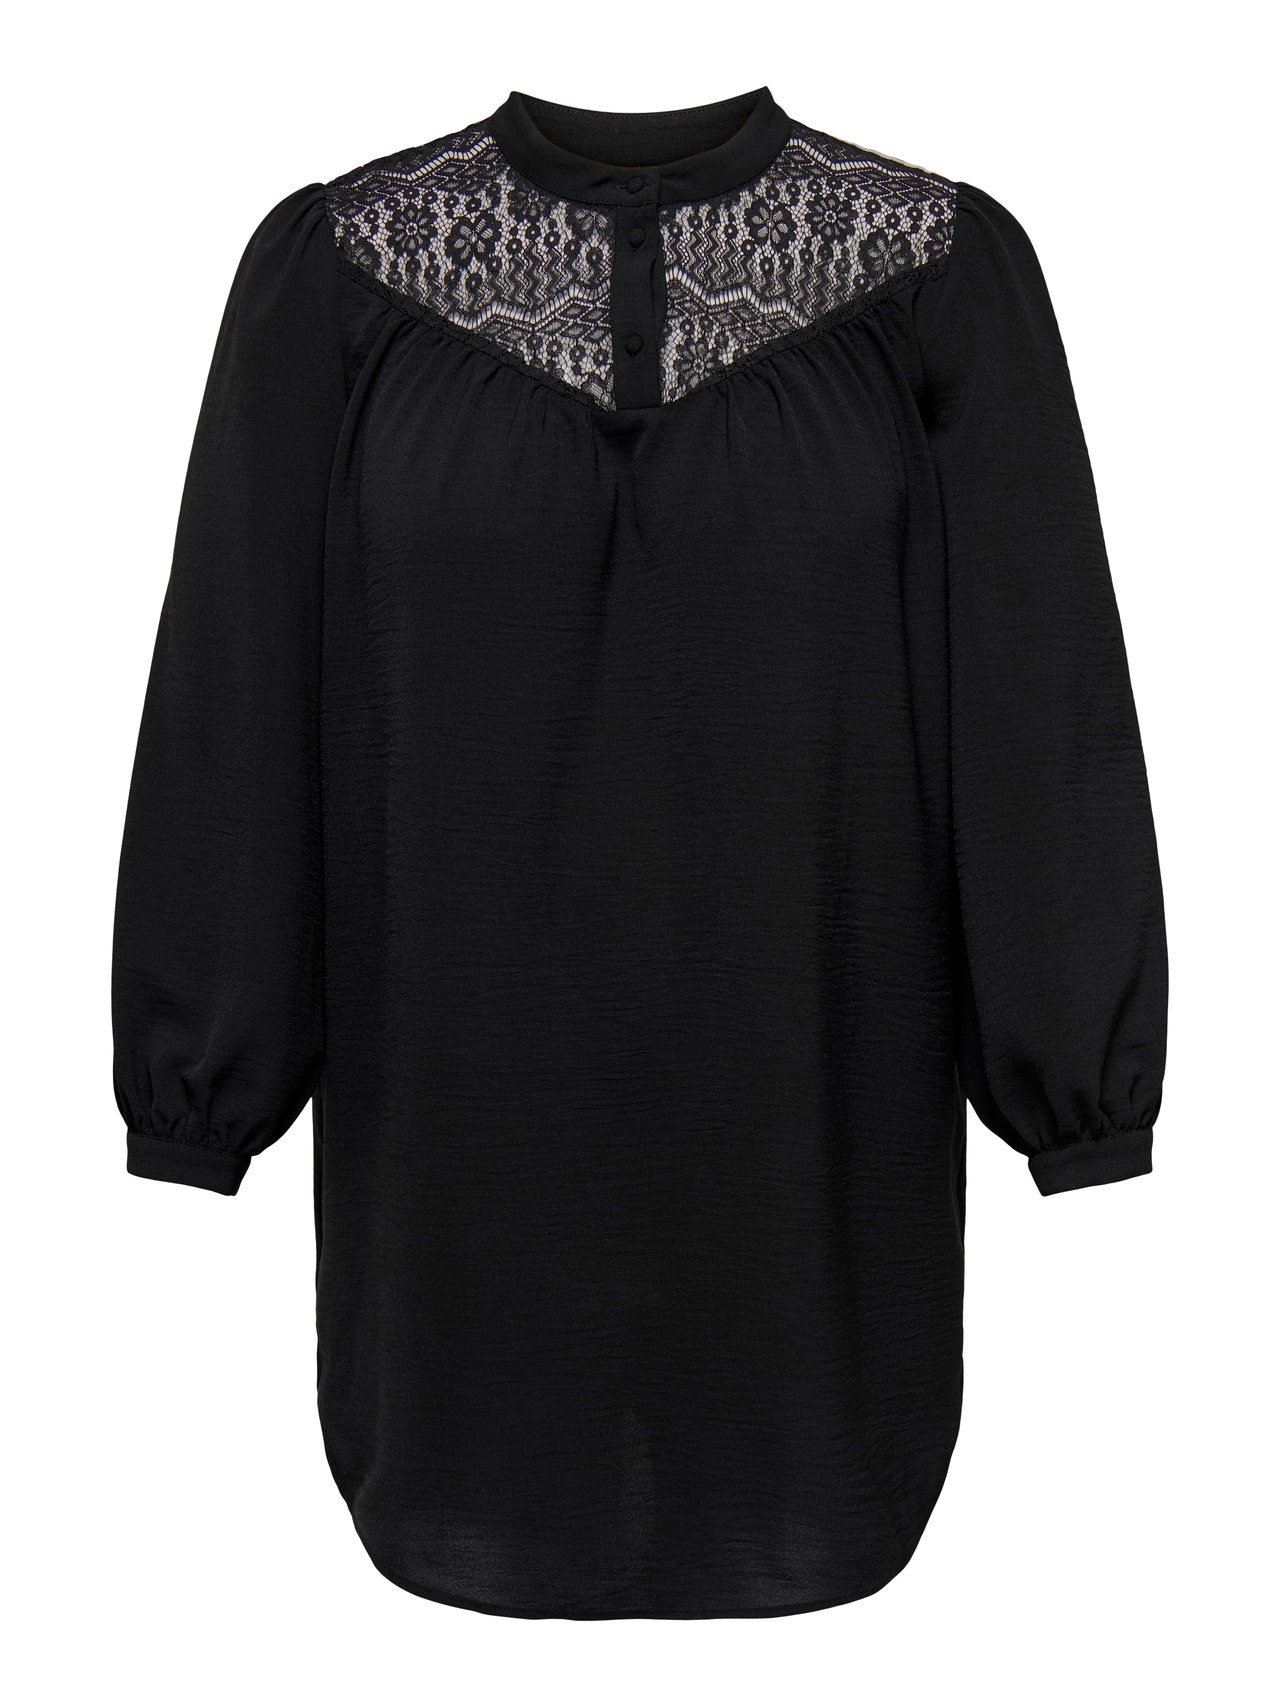 ONLY Curvy Long shirt with lace -Black - 15310493